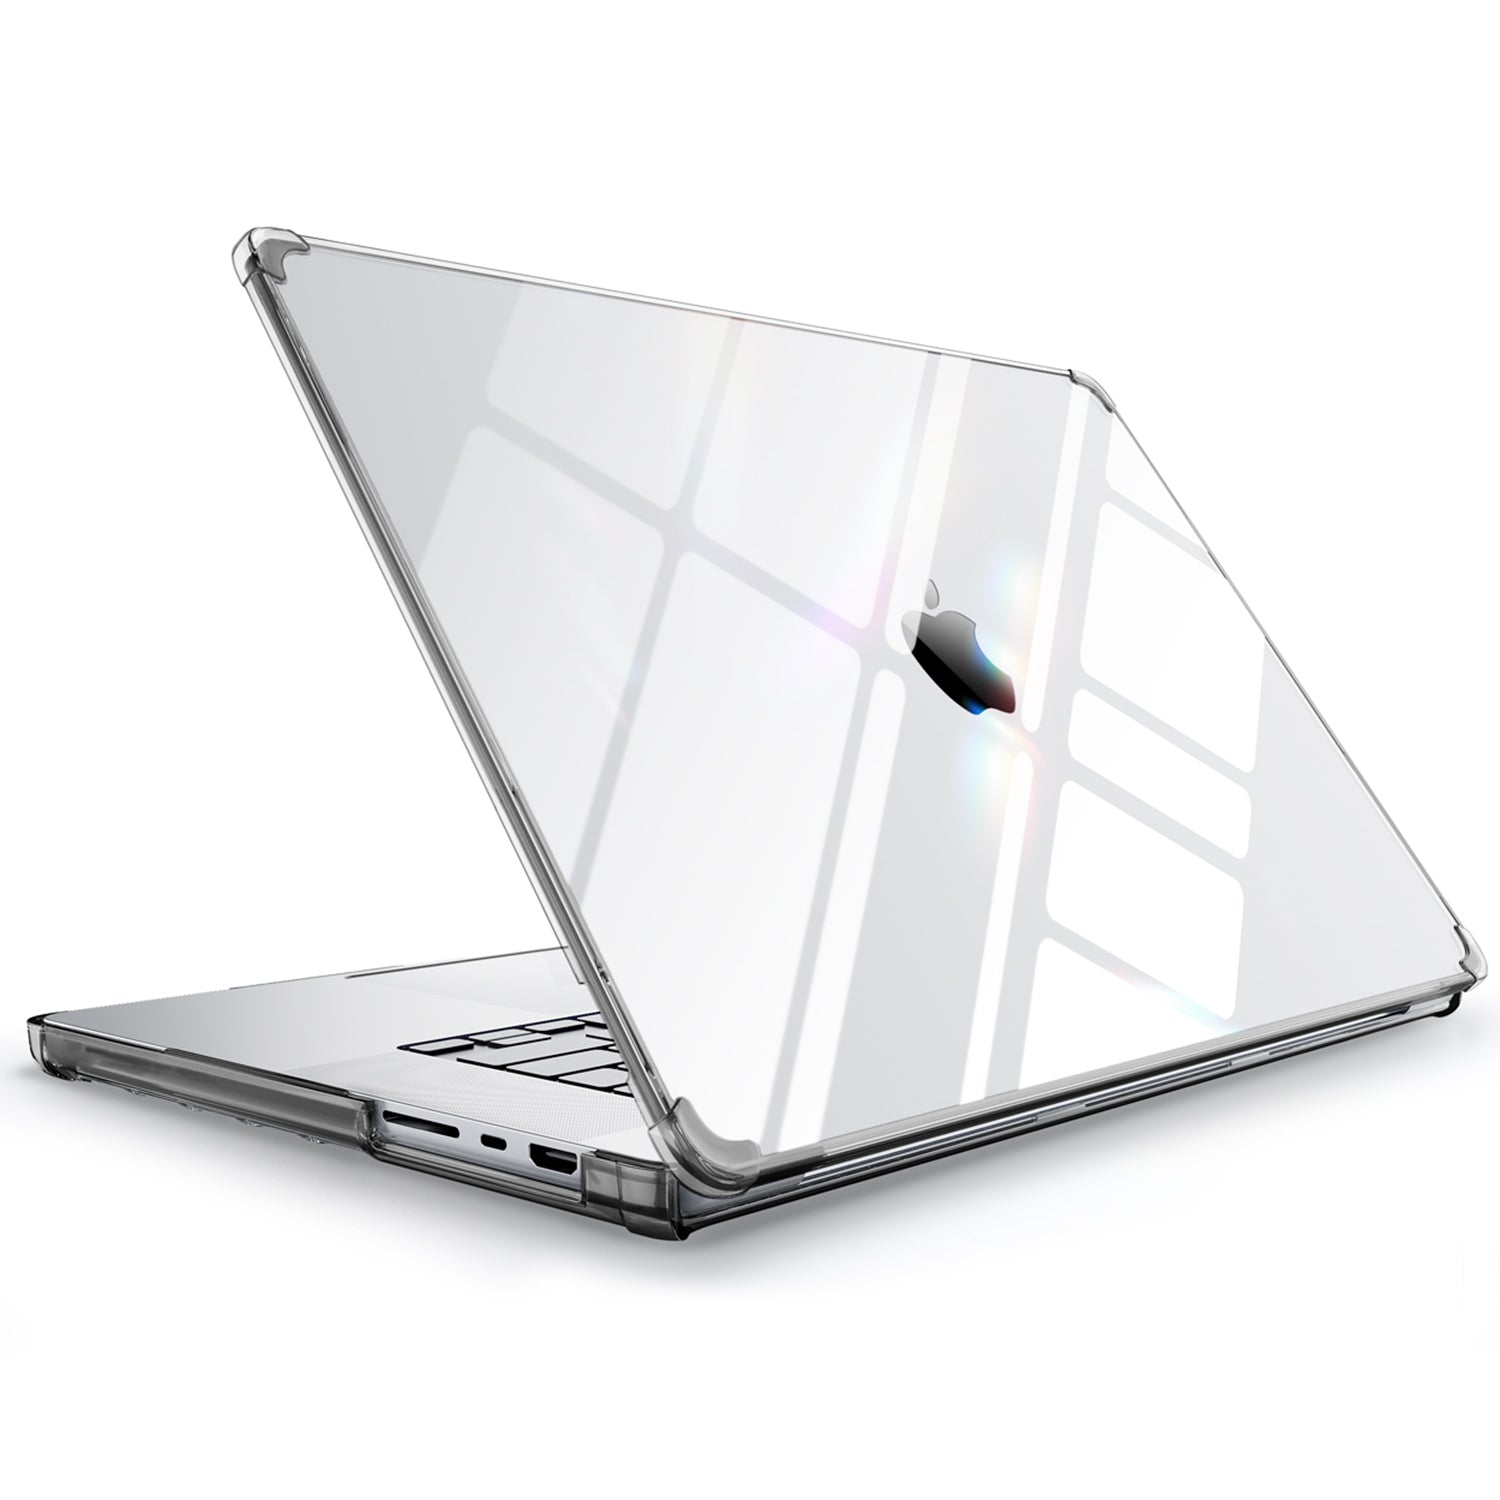 Supcase Unicorn Beetle Clear Series Case Slim Clear Protective Cover Designed for MacBook Pro 14 Inch (2021 Release) A2442 M1 Pro / M1 Max Default Supcase 